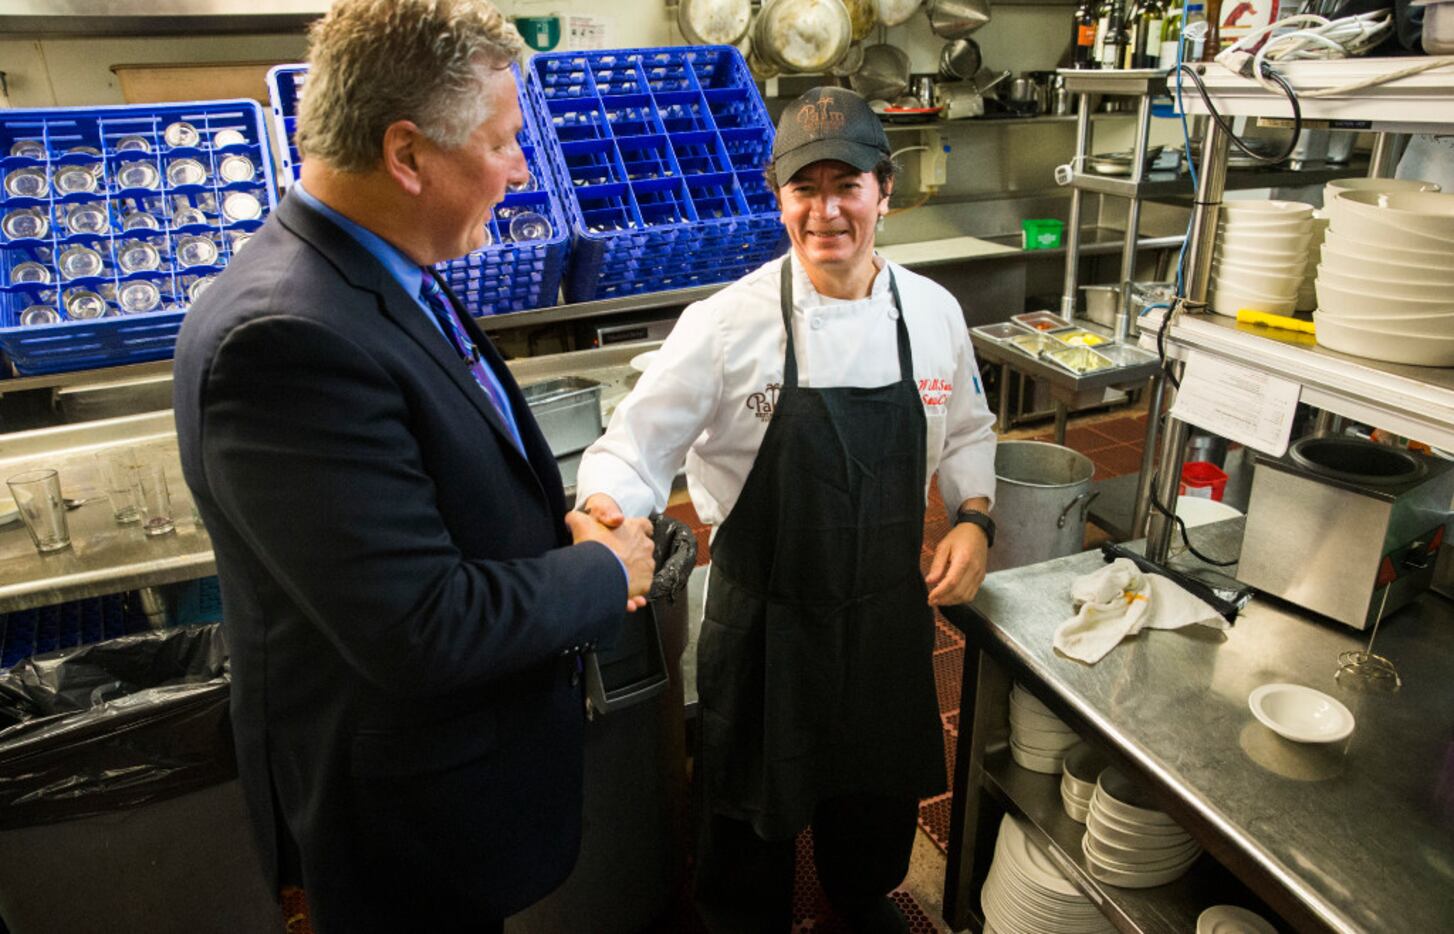 Al Biernat, former manager of the Palm restaurant, shakes hands with long-time sous chef...